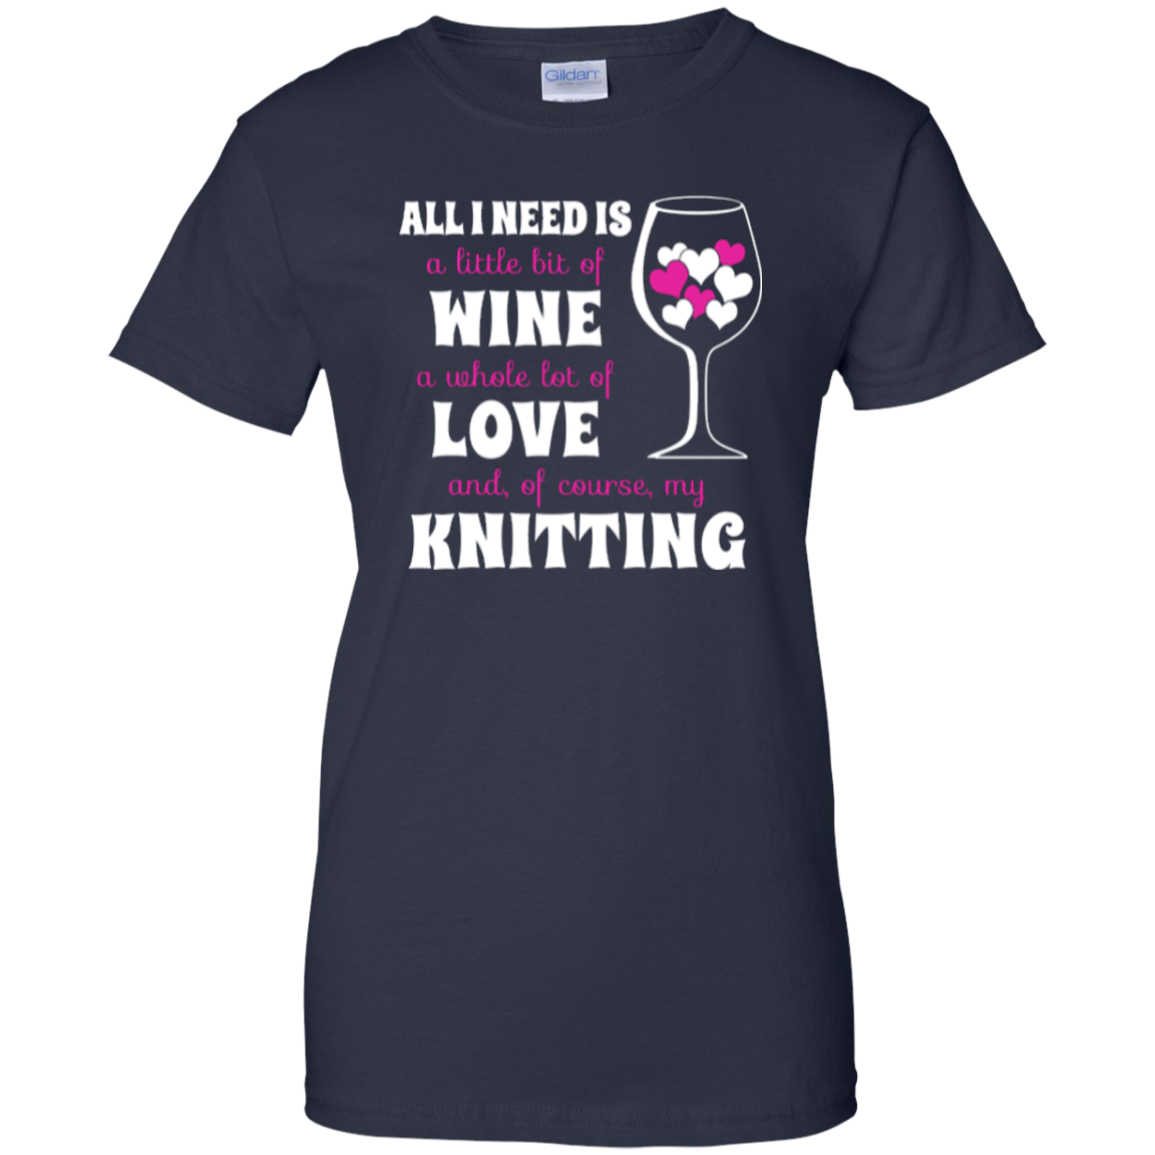 All I Need is Wine-Love-Knitting Ladies Custom 100% Cotton T-Shirt - Crafter4Life - 8